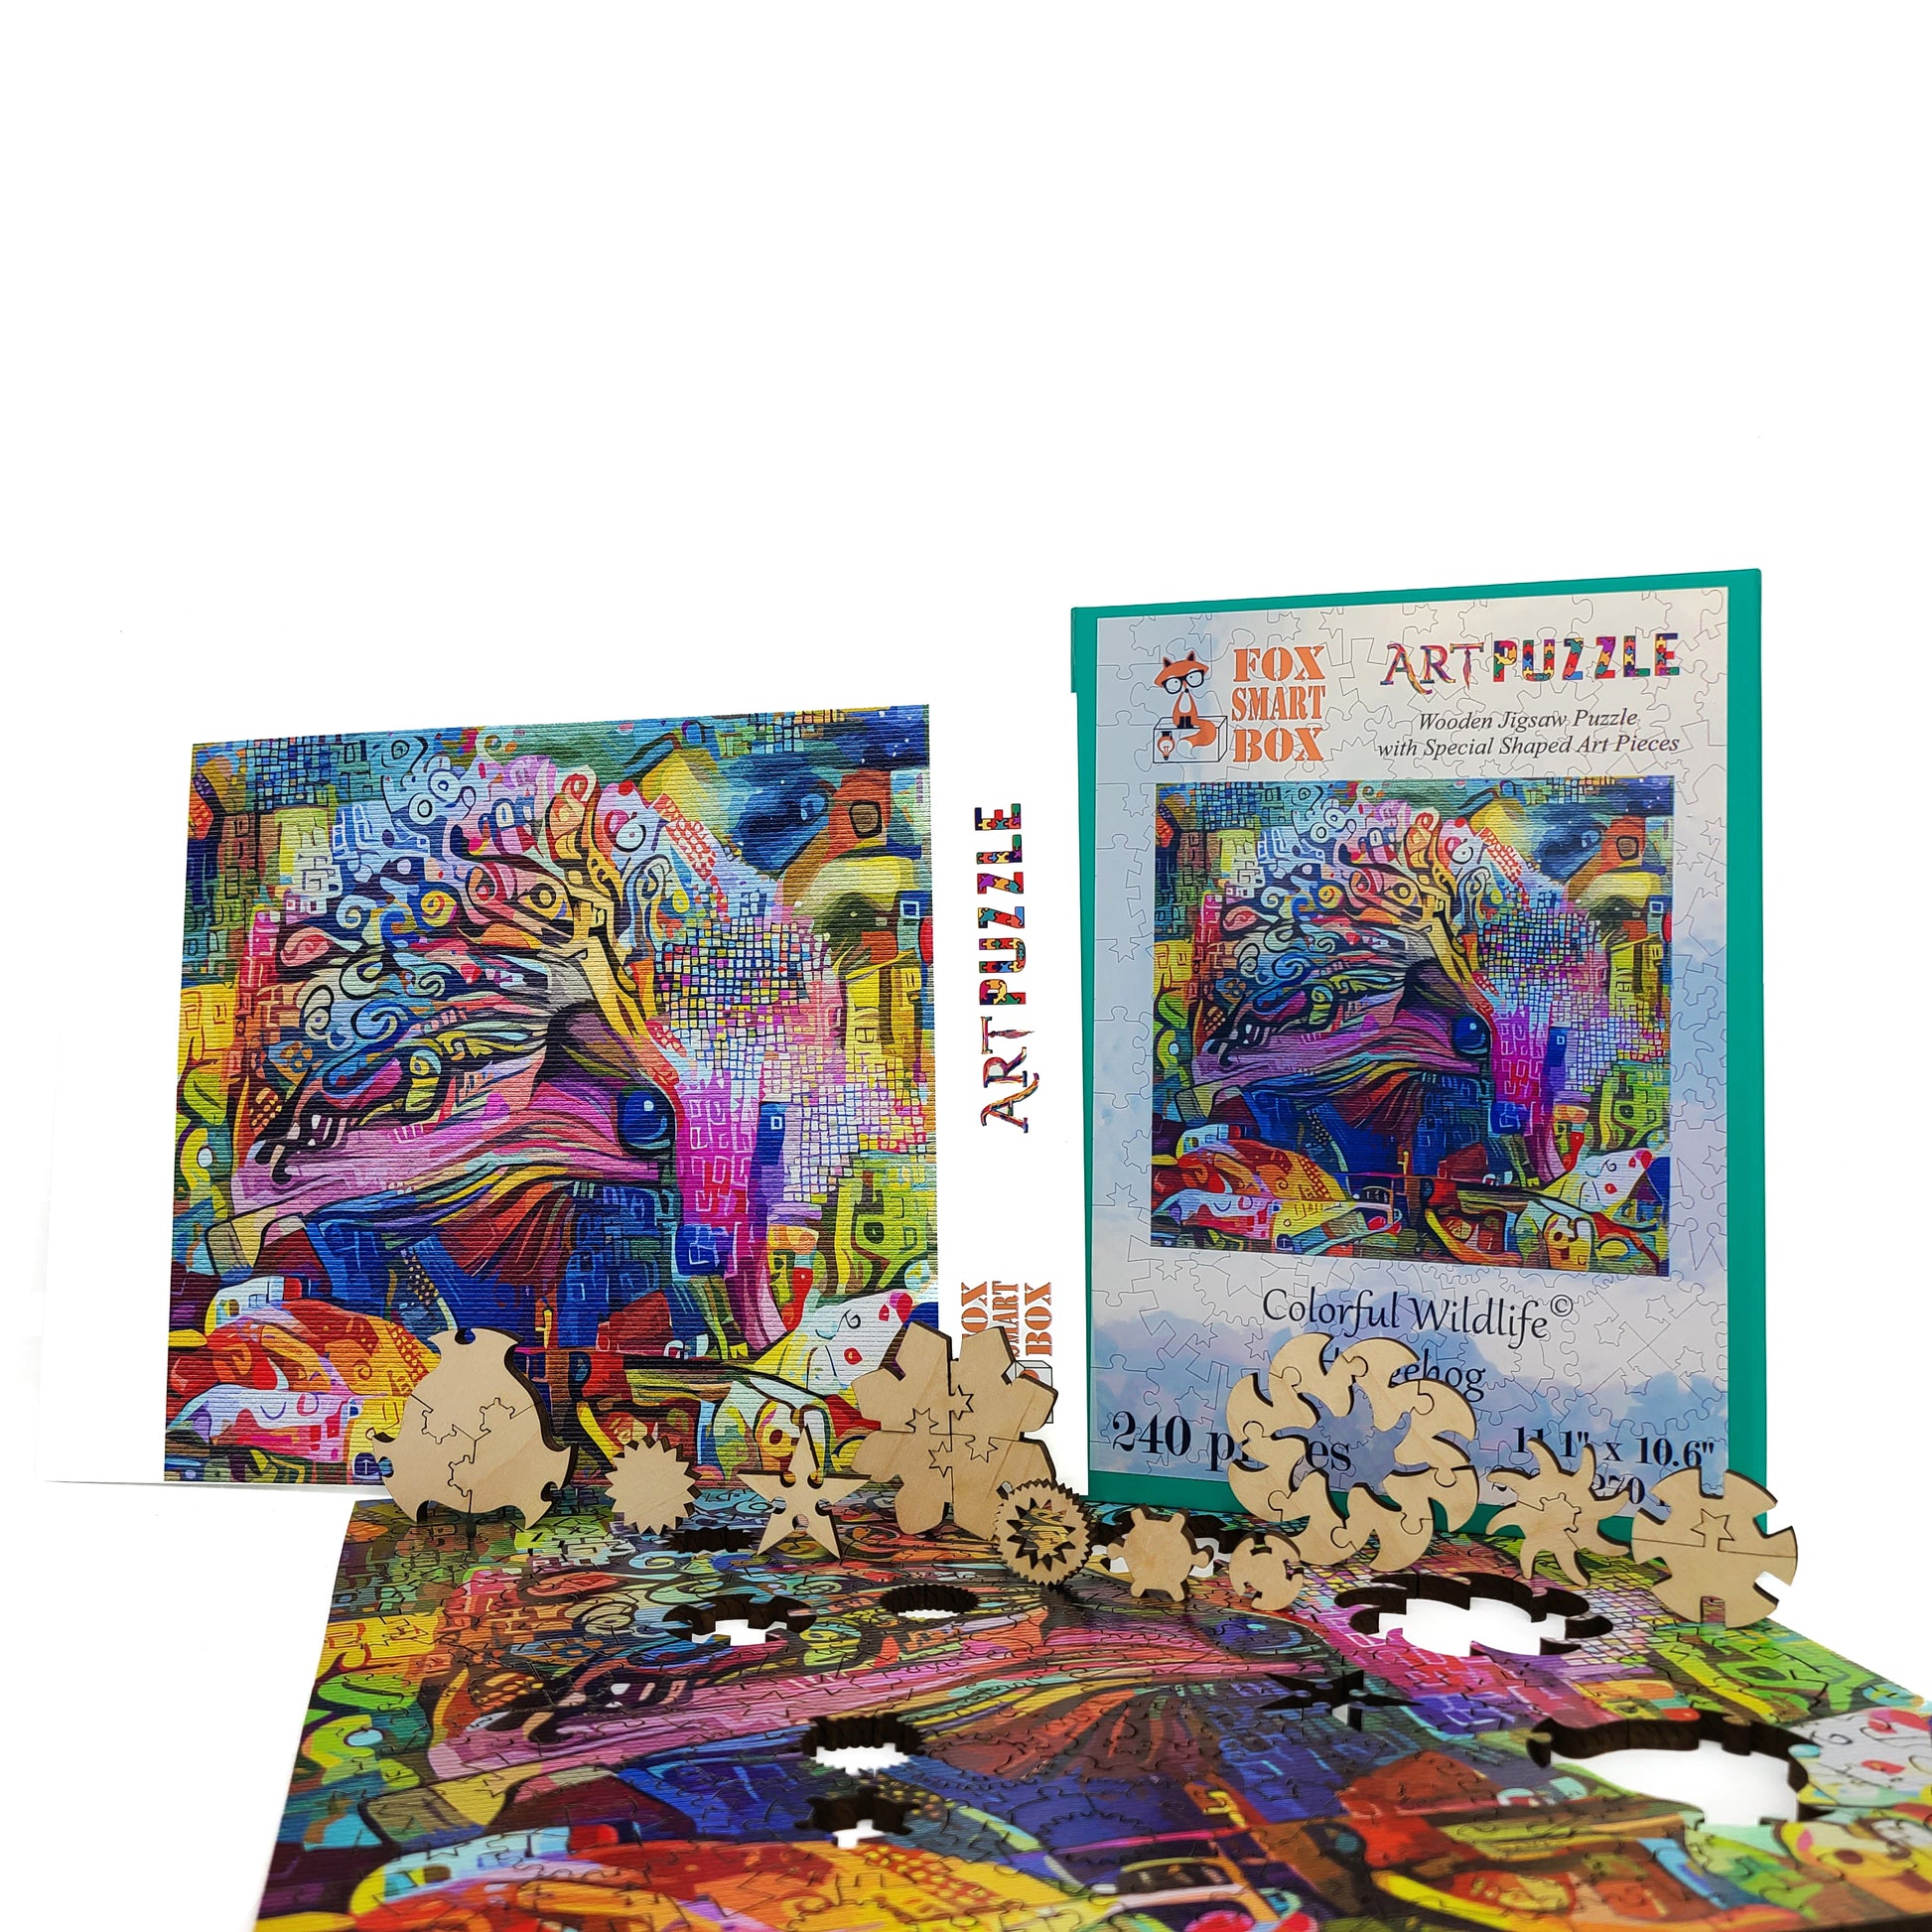 Better Co. - Modern Art Puzzle 1000 Pieces - Challenge Yourself with  Difficult Abstract Paint Puzzles for Adults, and Teens